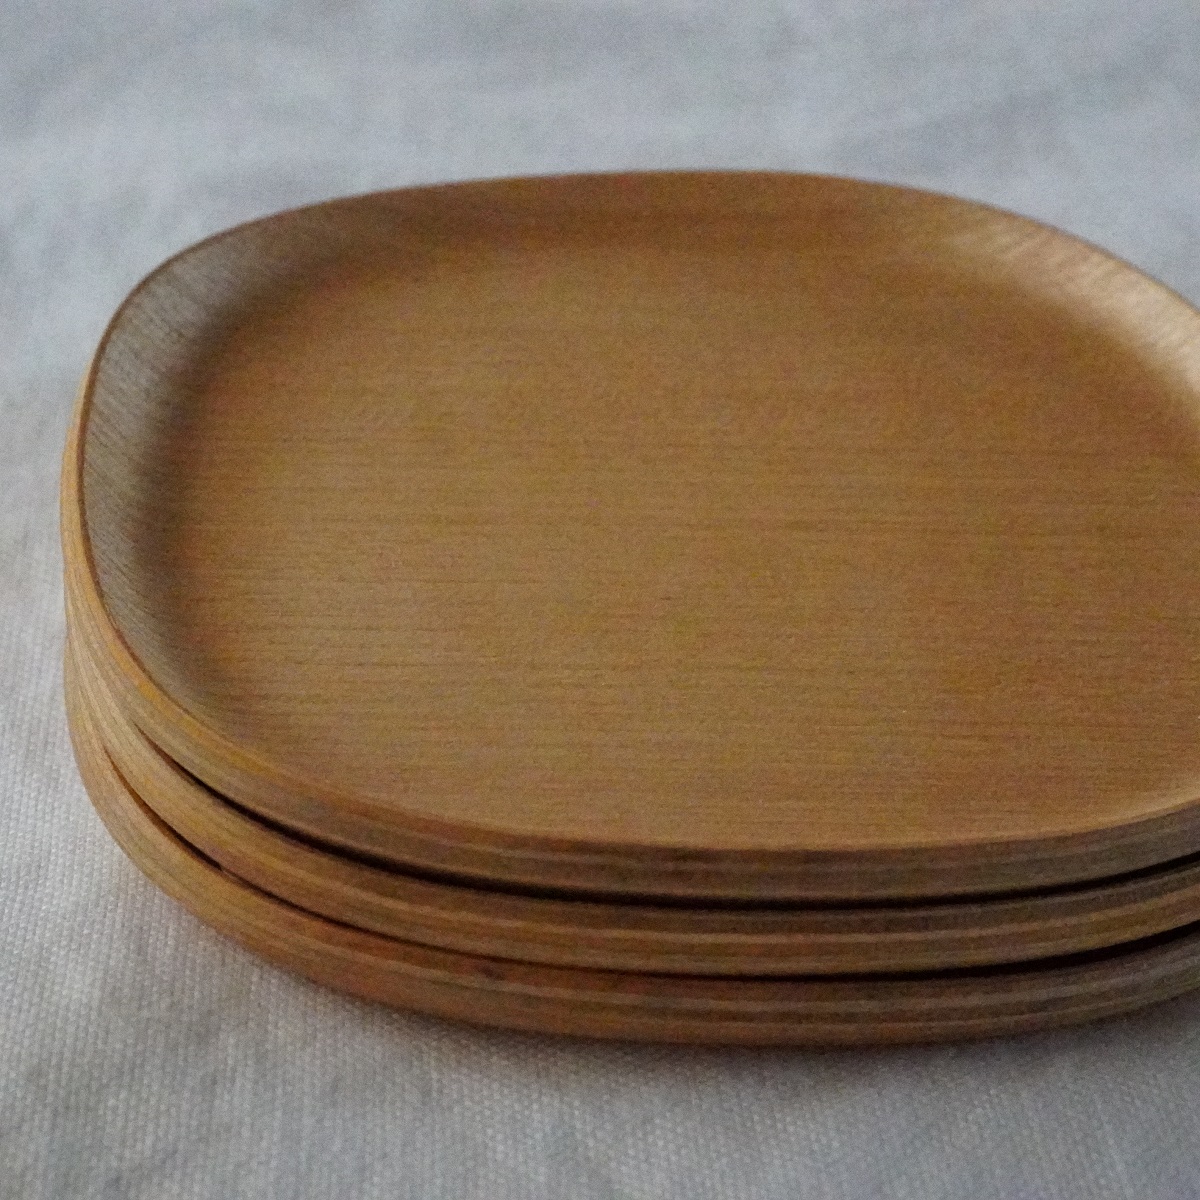  nonslip saucer Coaster tray natural tree UNITEA Maple 125×125mm KINTO click post including in a package possibility 